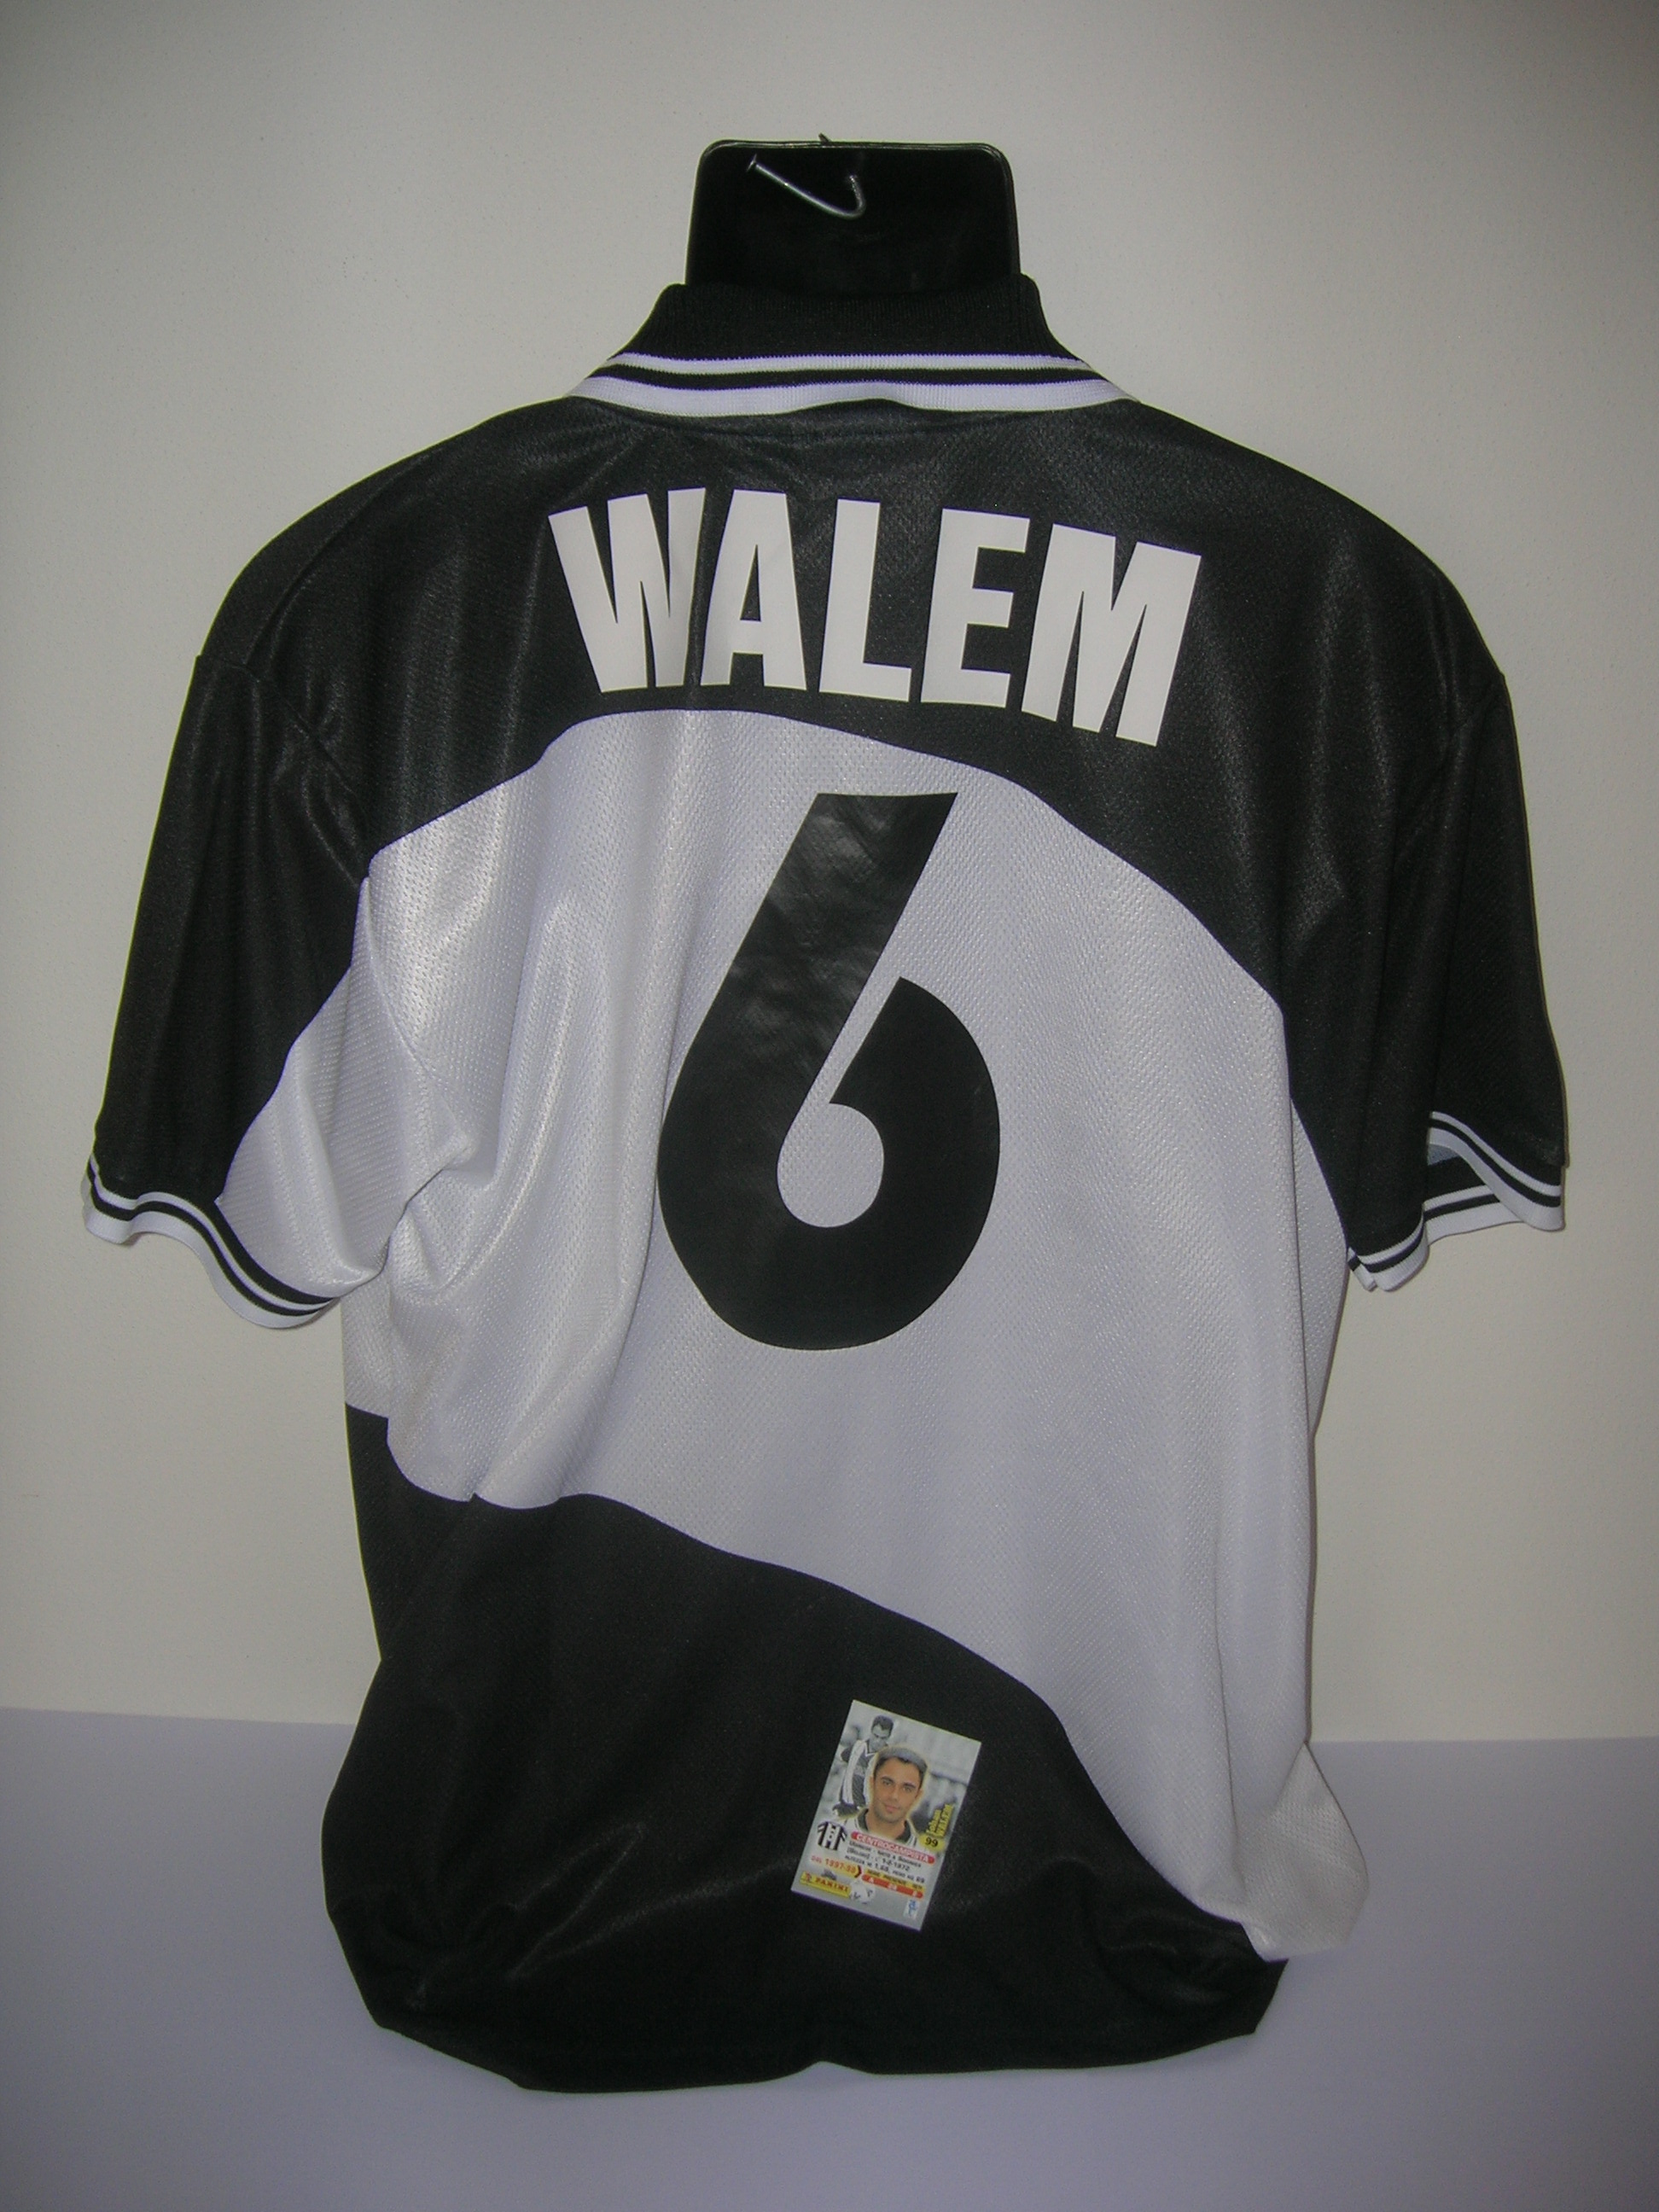 Udinese  Walen  6  A-2